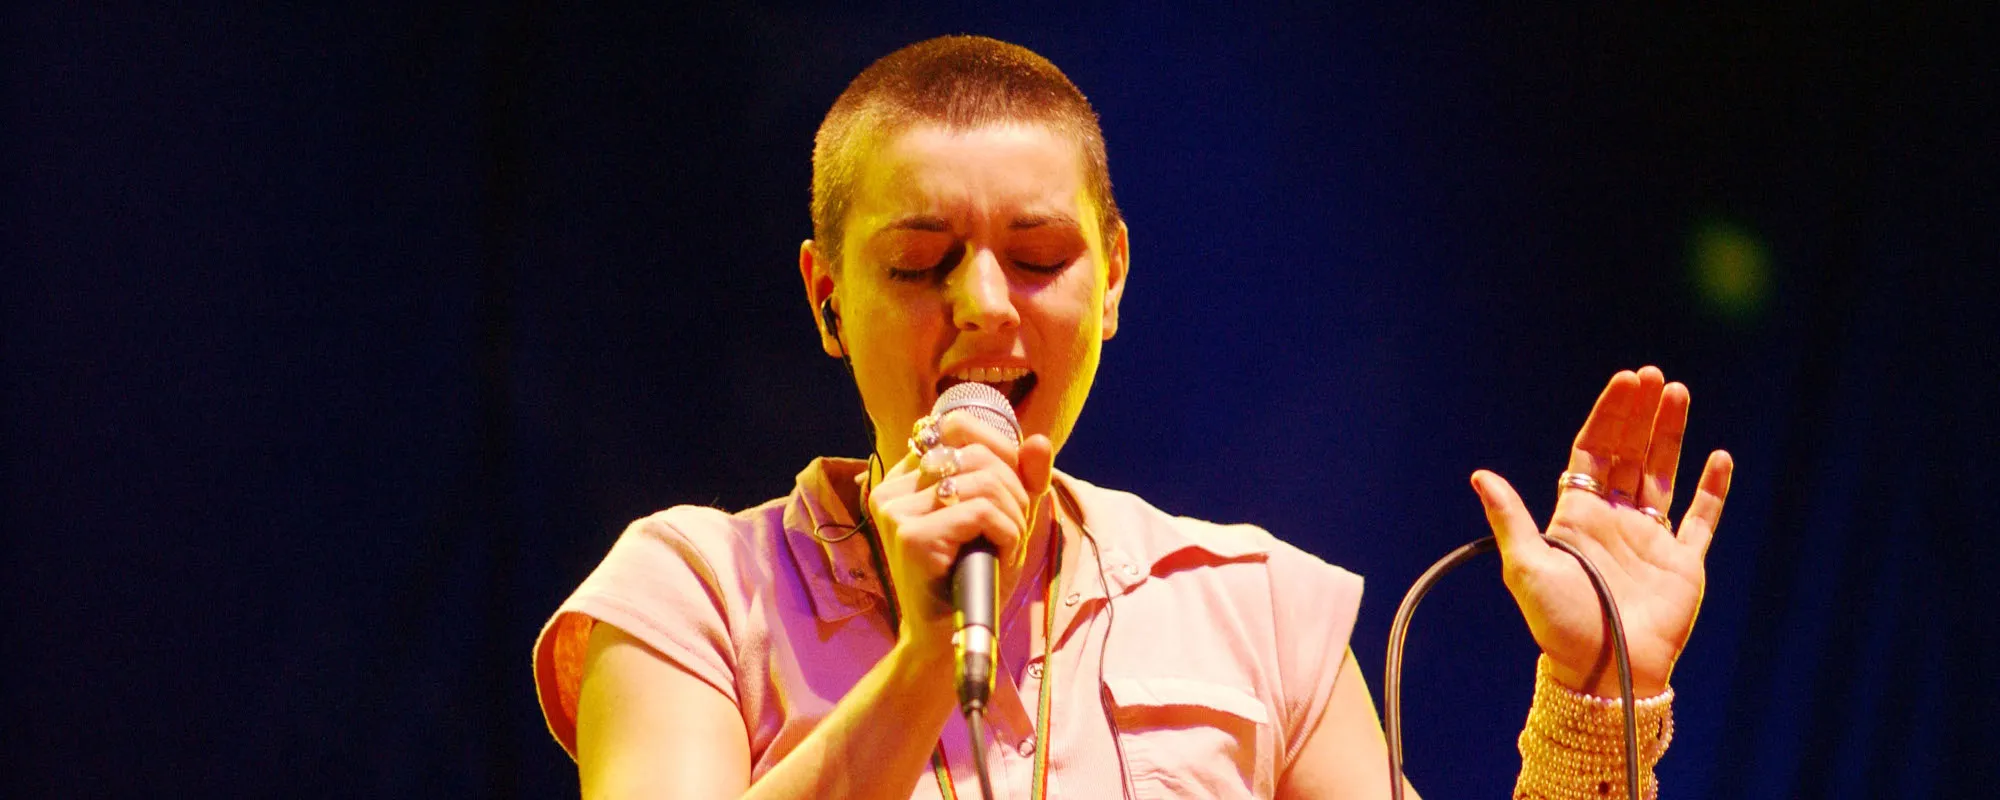 The Meaning Behind “Mandinka” by Sinéad O’Connor and the TV Miniseries that Inspired It